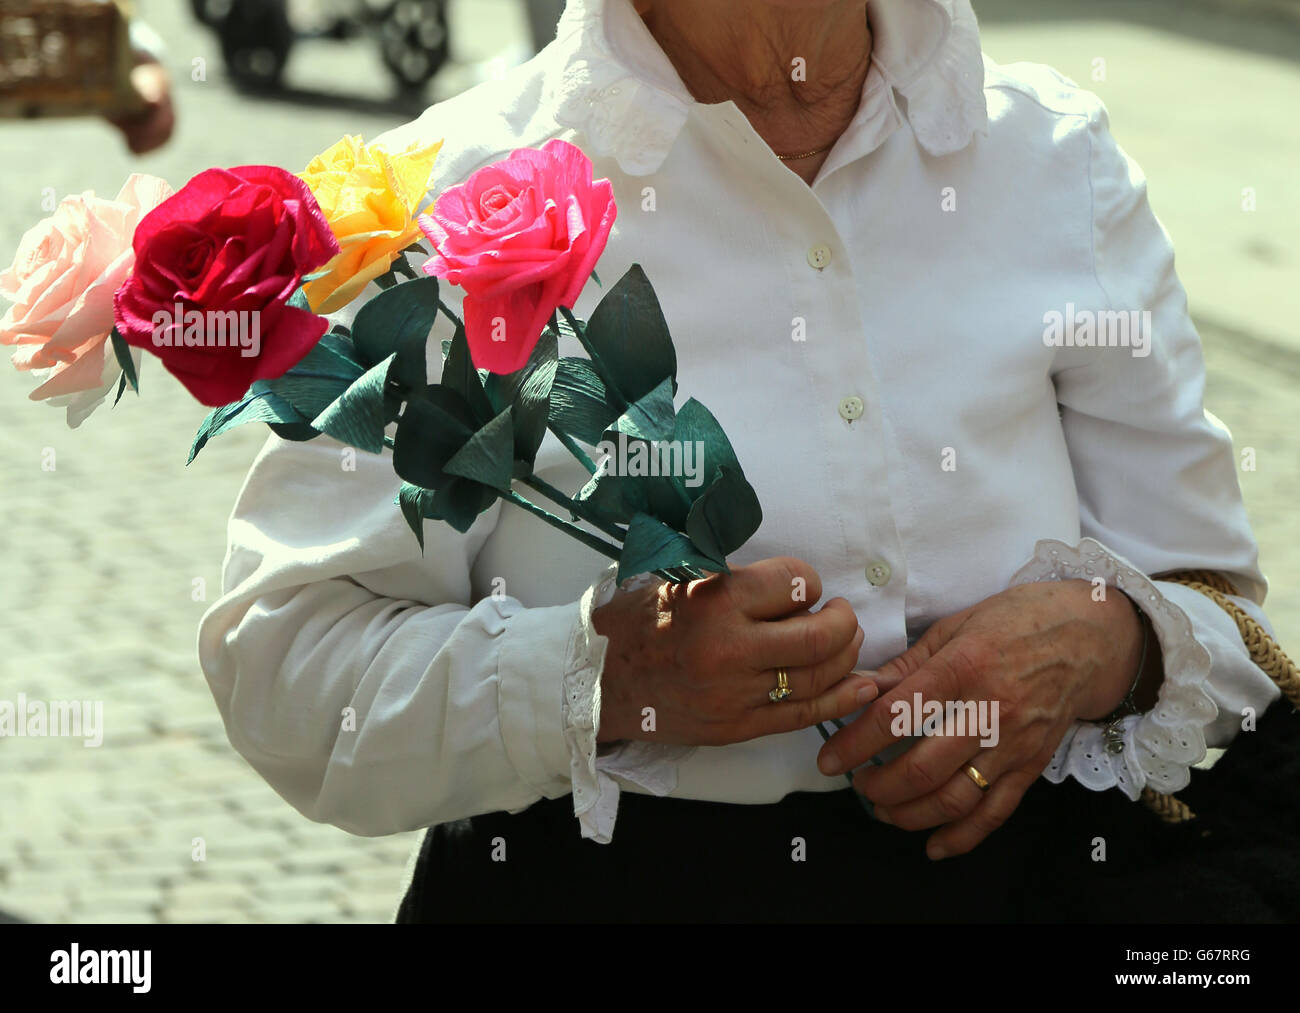 old lady with white blouse walks with a pack of four roses in her hand Stock Photo